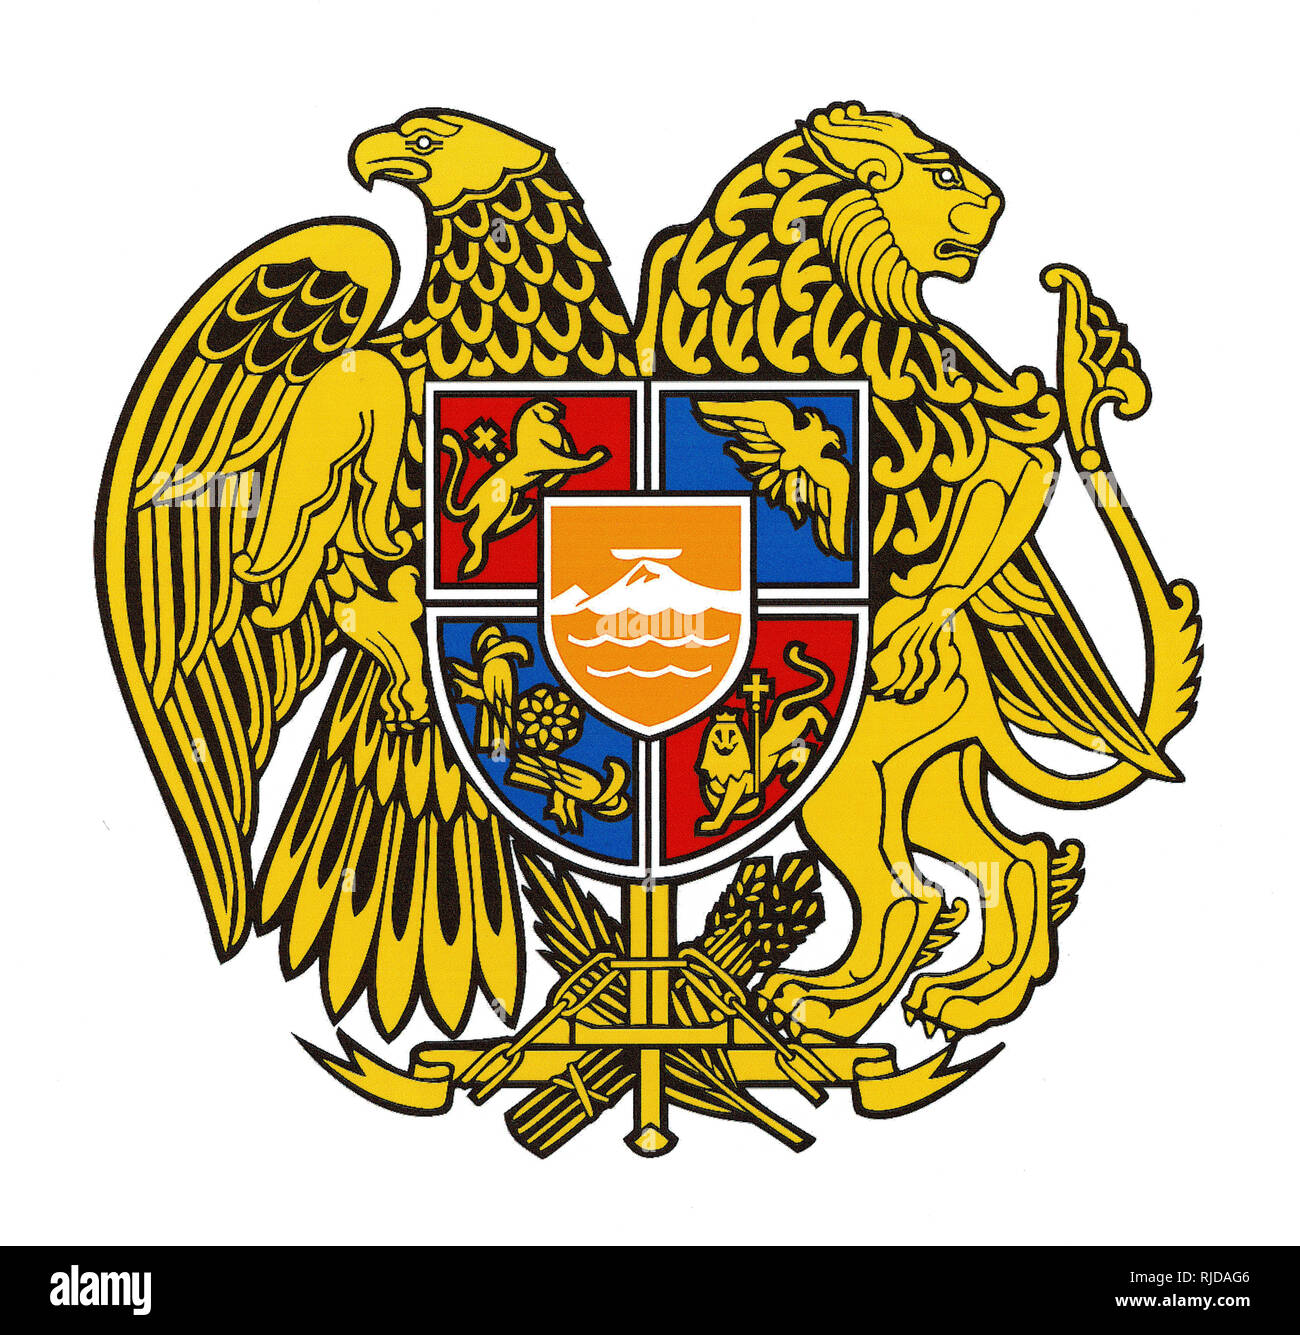 National coat of arms of the Republic of Armenia. Stock Photo